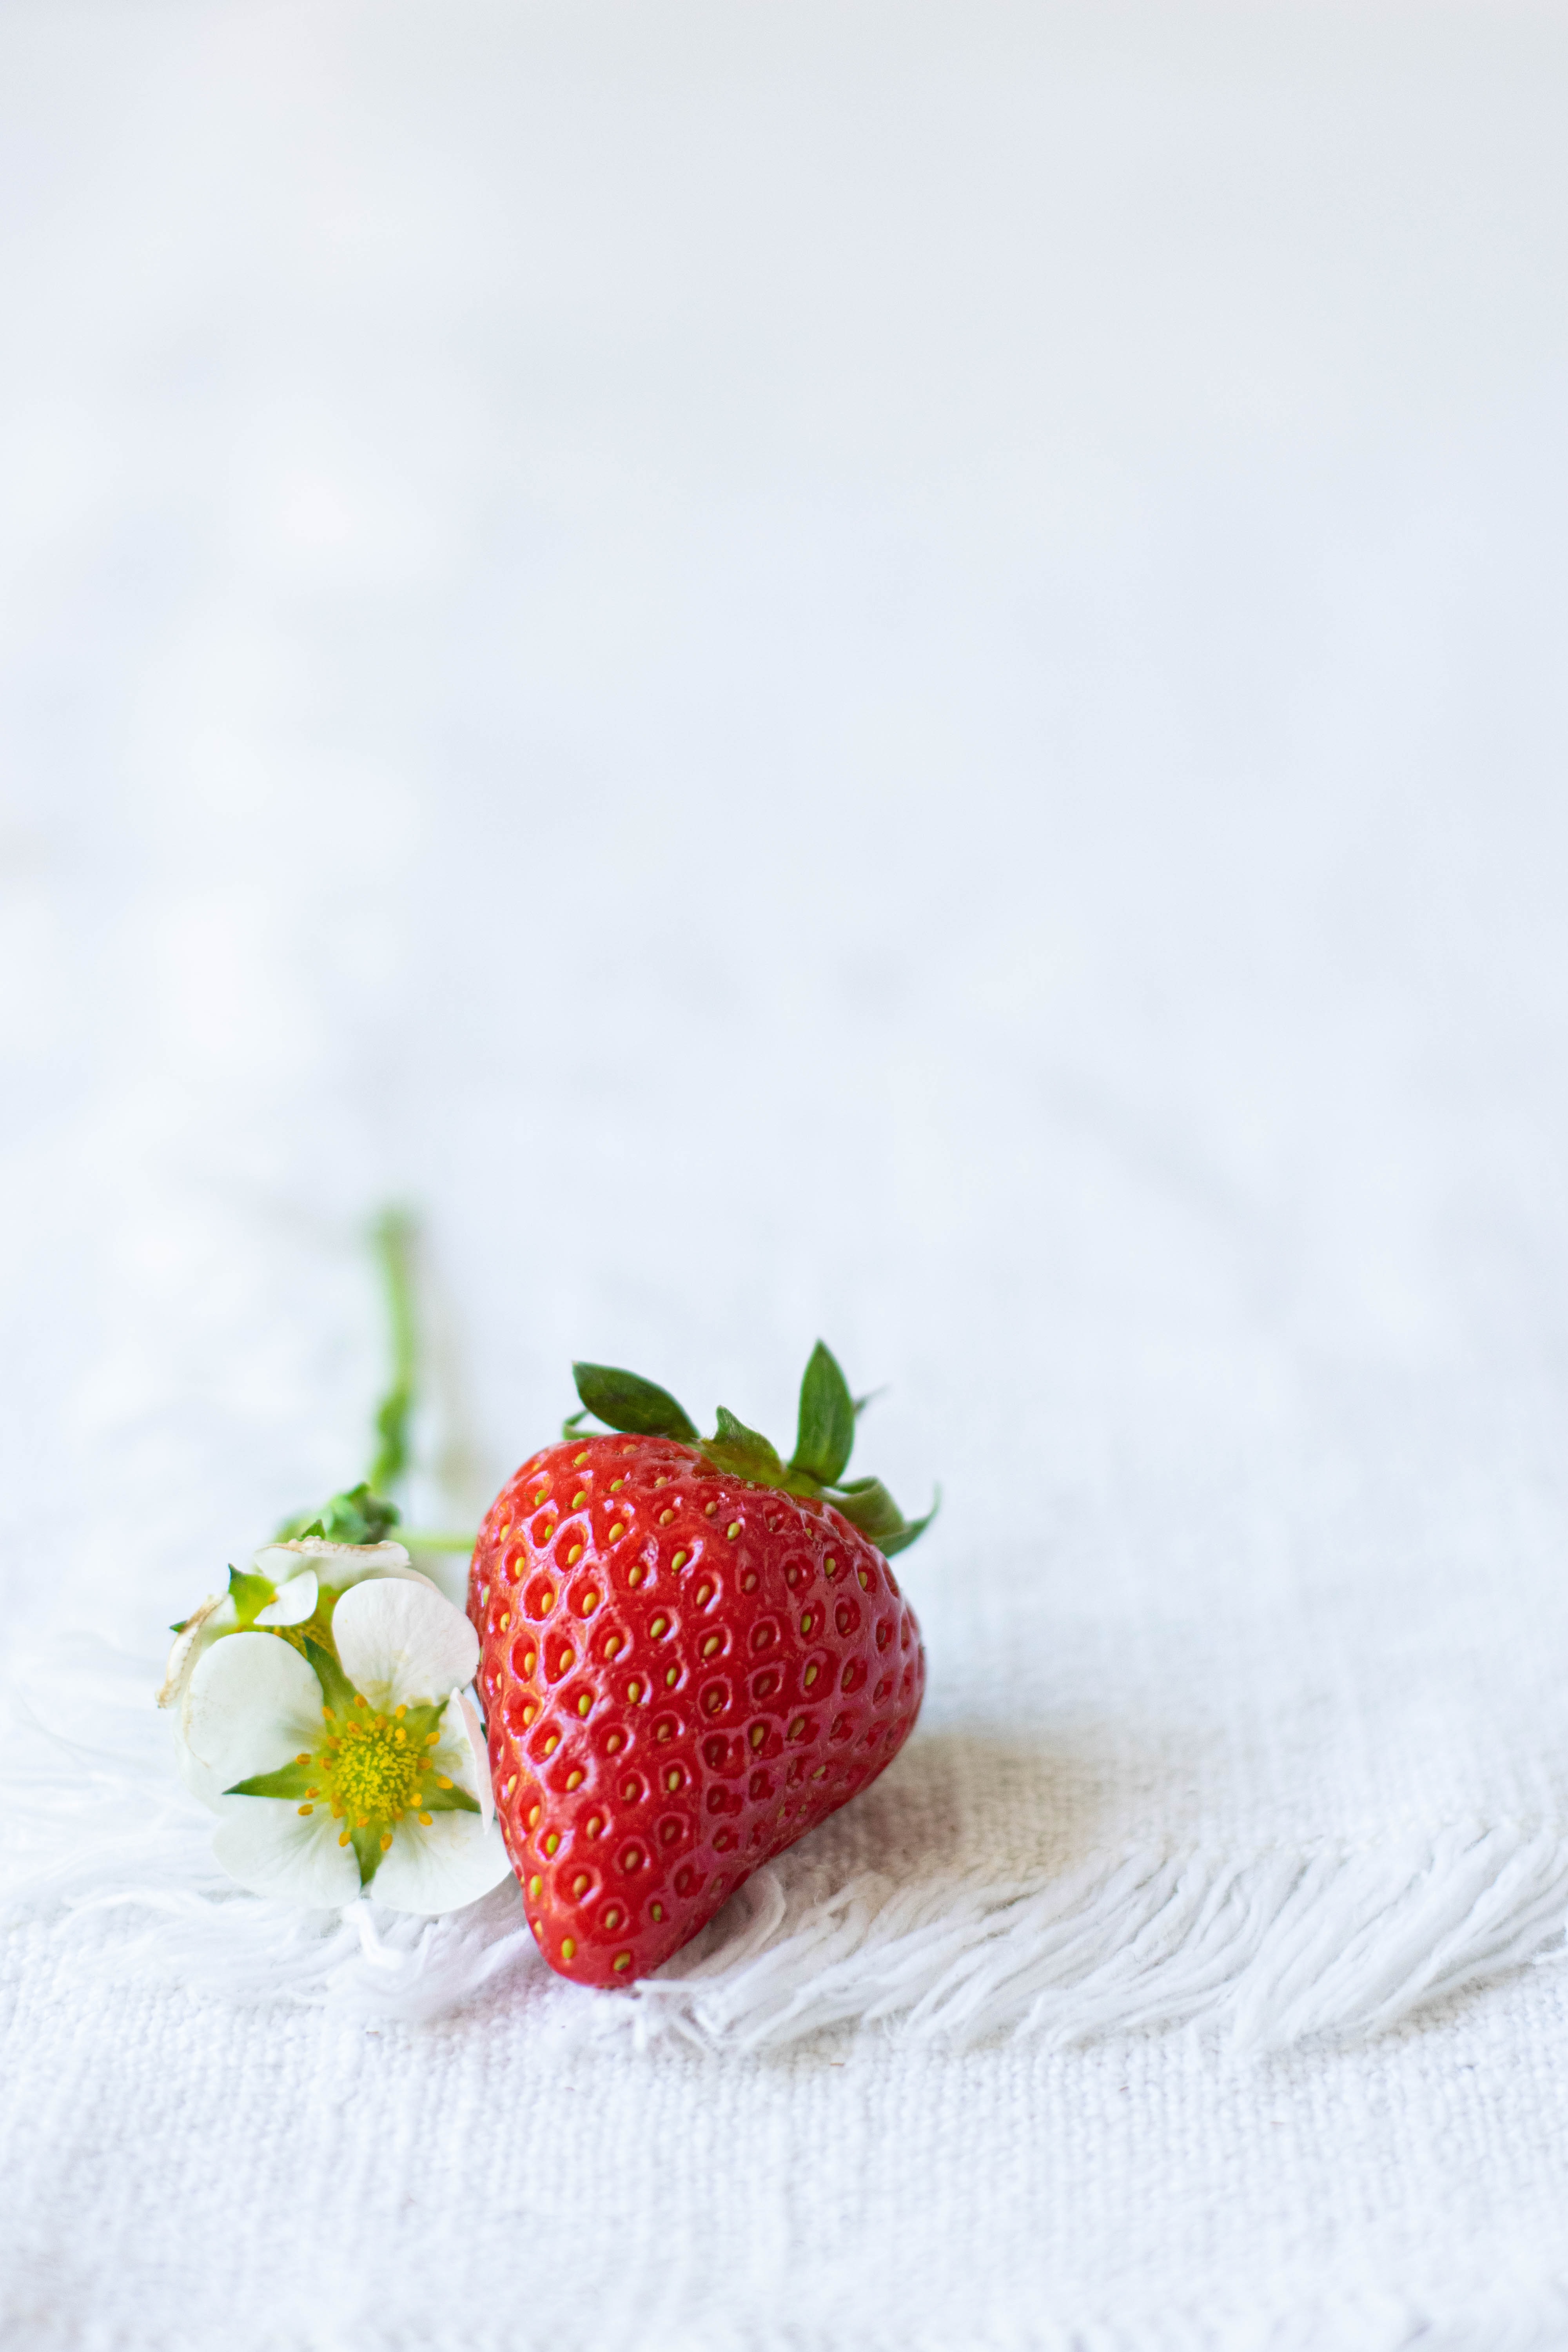 flowers, food, strawberry, cloth, berry